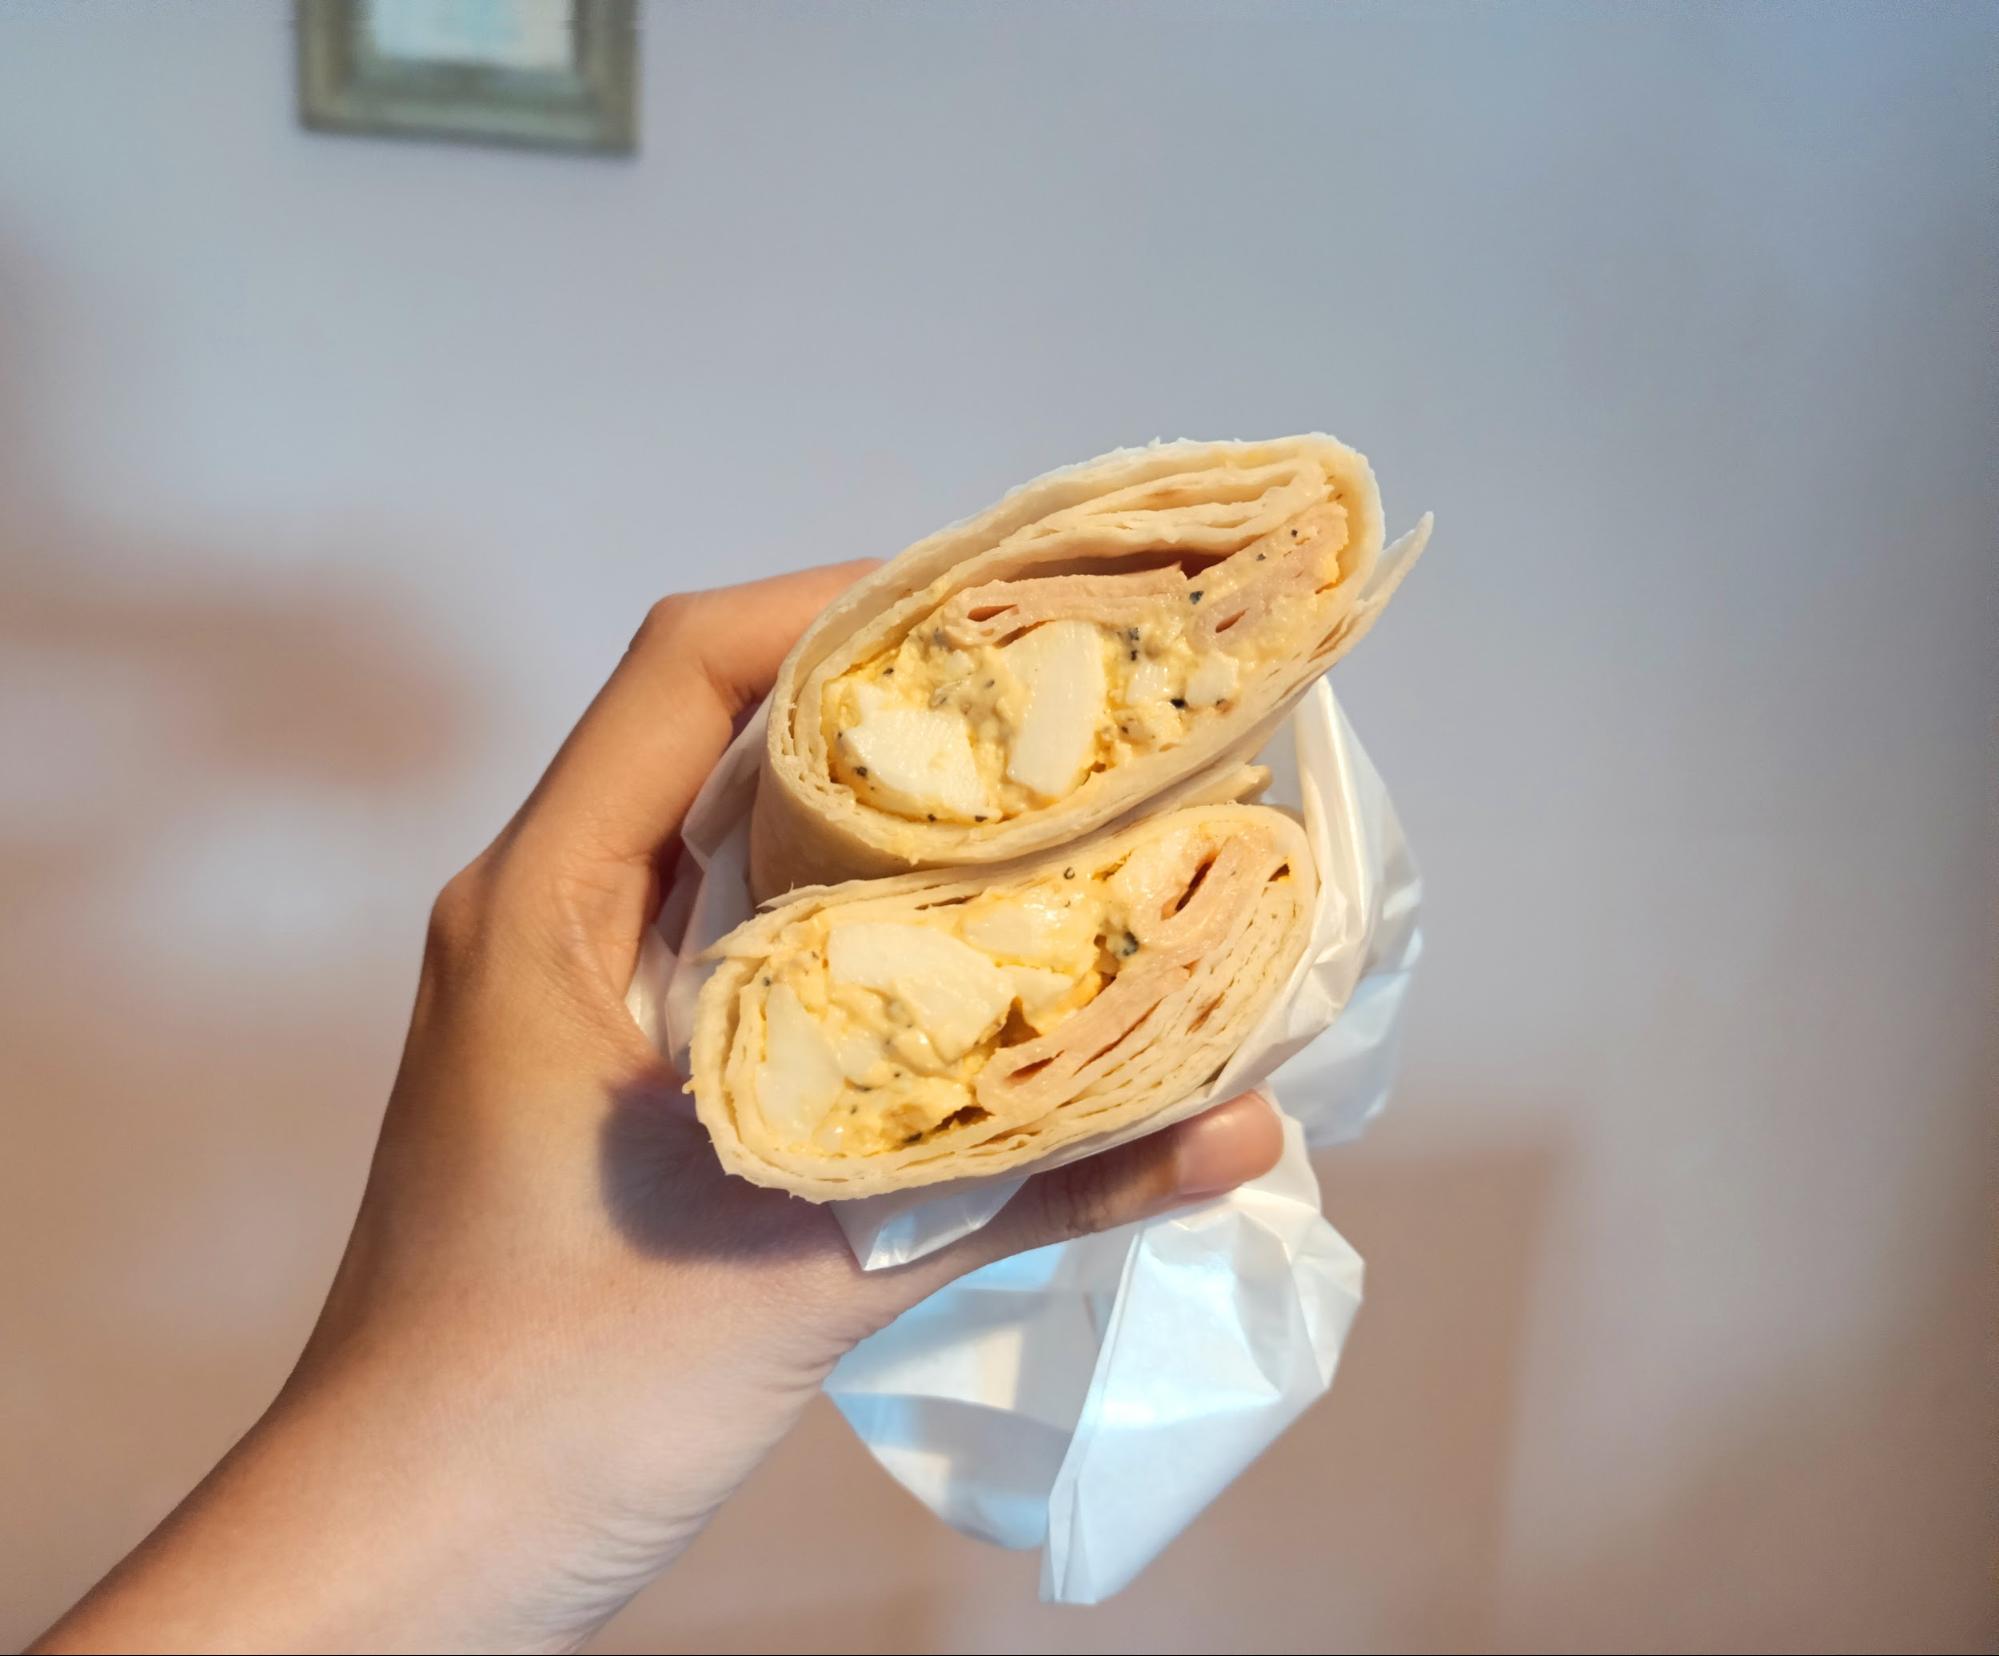 7-Eleven limited-edition breakfast wraps